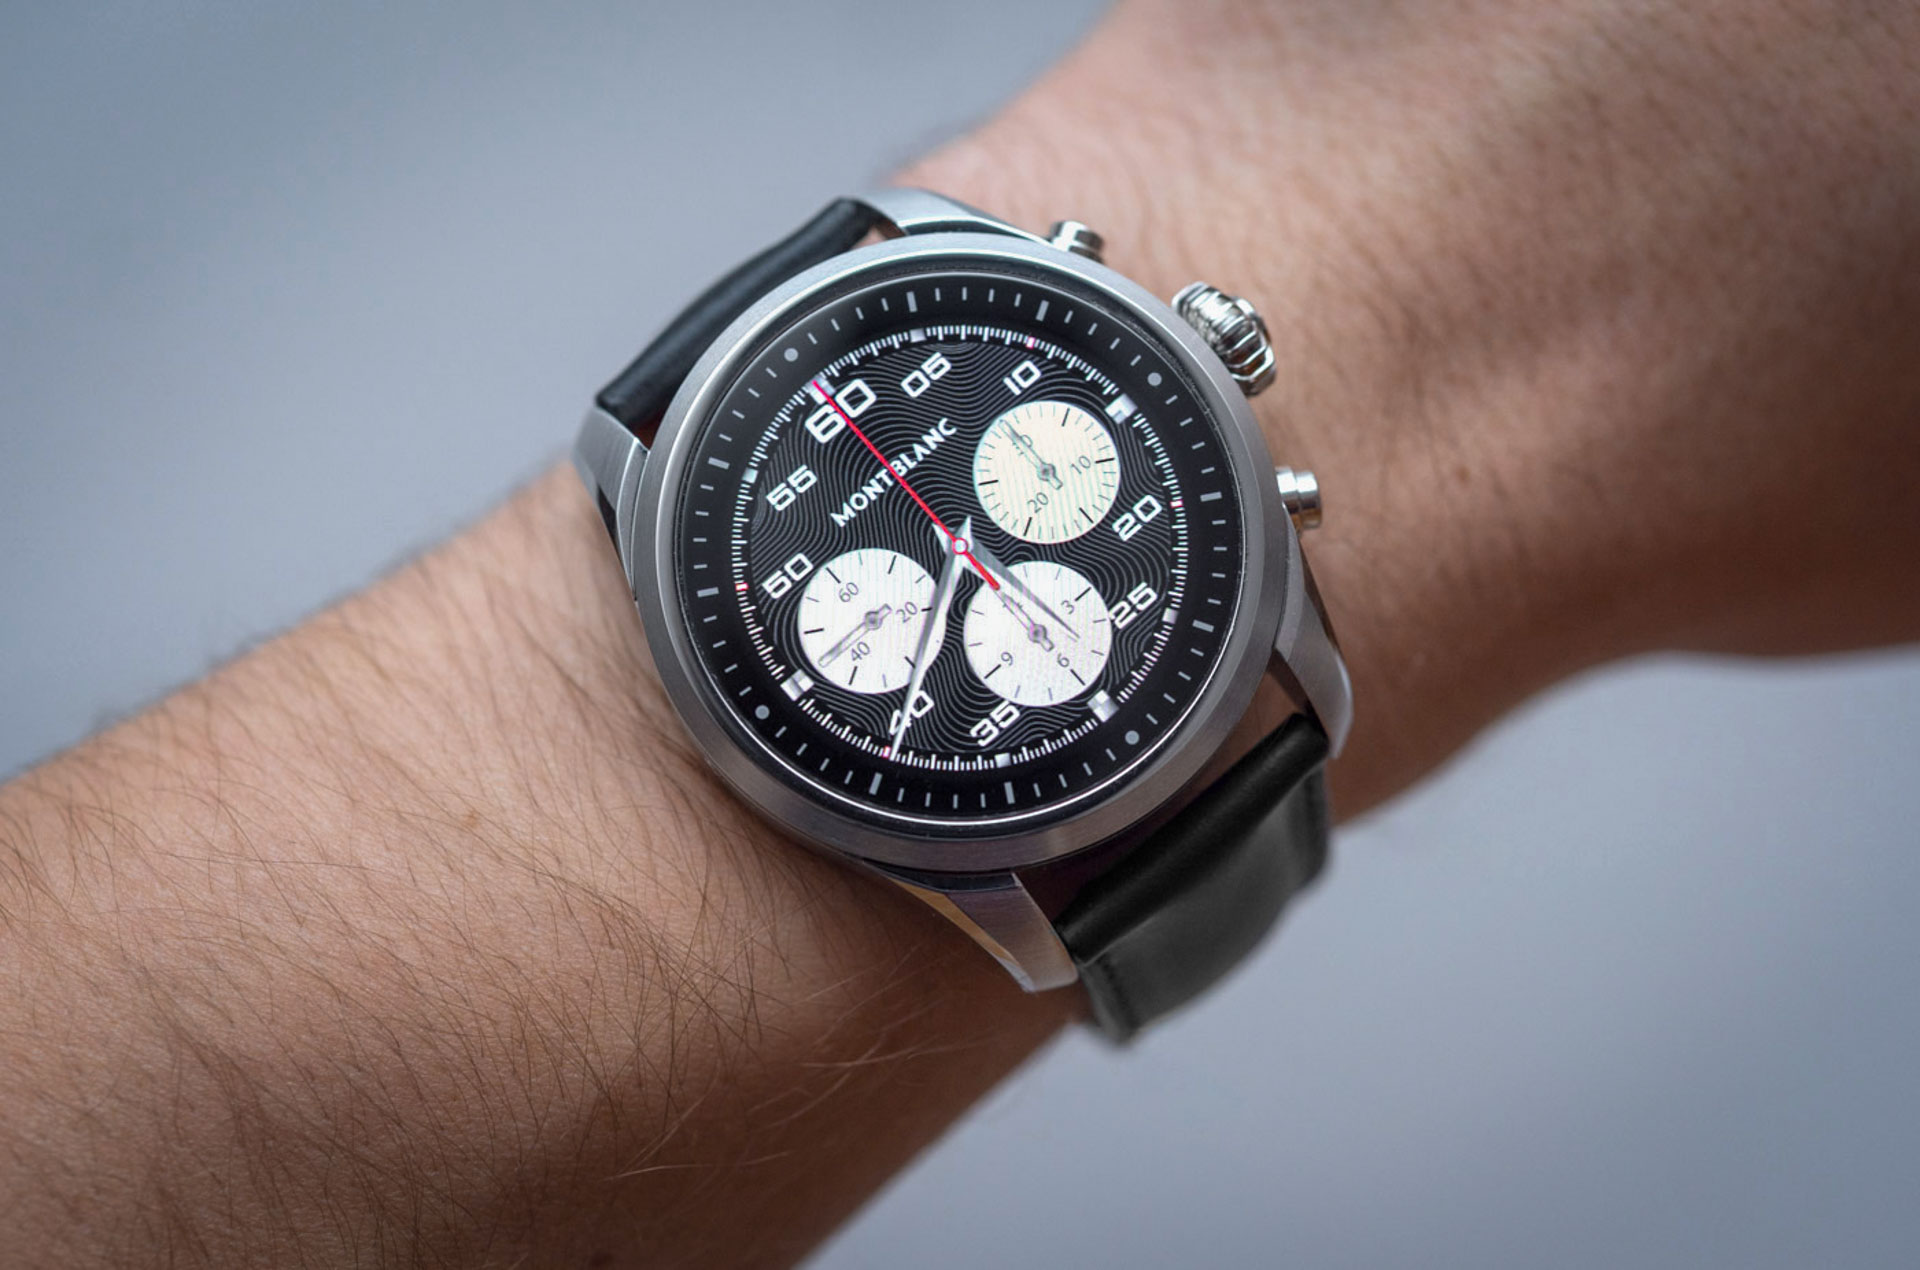 From Hermes to Montblanc: A guide to the fanciest smartwatches of 2019